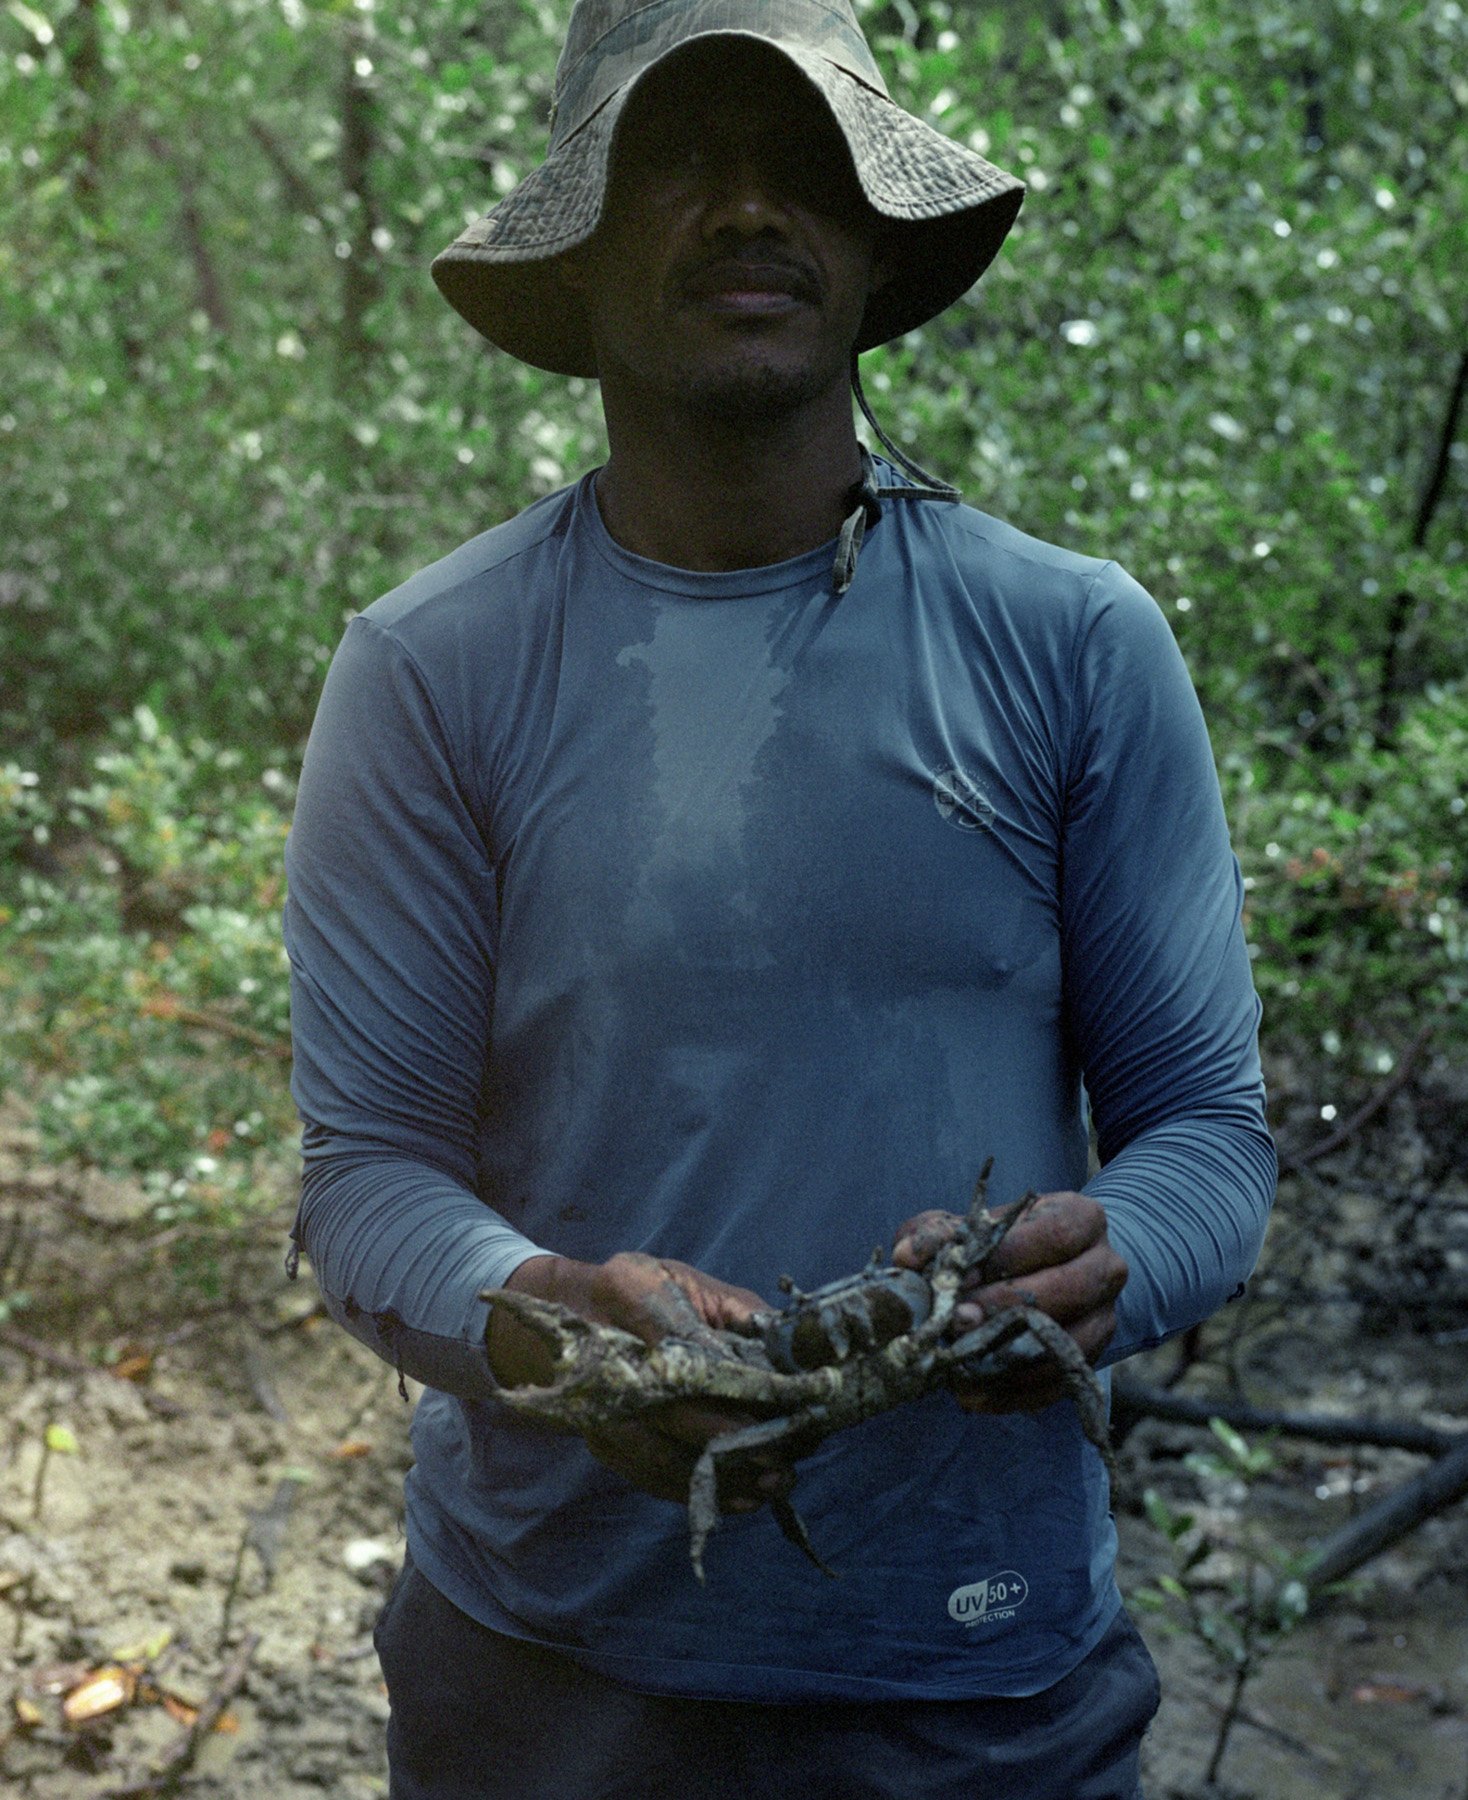  Candeias, Bahia, Brazil, 2022. A member of the Quilombo Boca do Rio, Luciano, shows a fished crabs, the main product sold by the Quilombolas. The waters where they fish are polluted with petrochemical residues and other chemical components.  